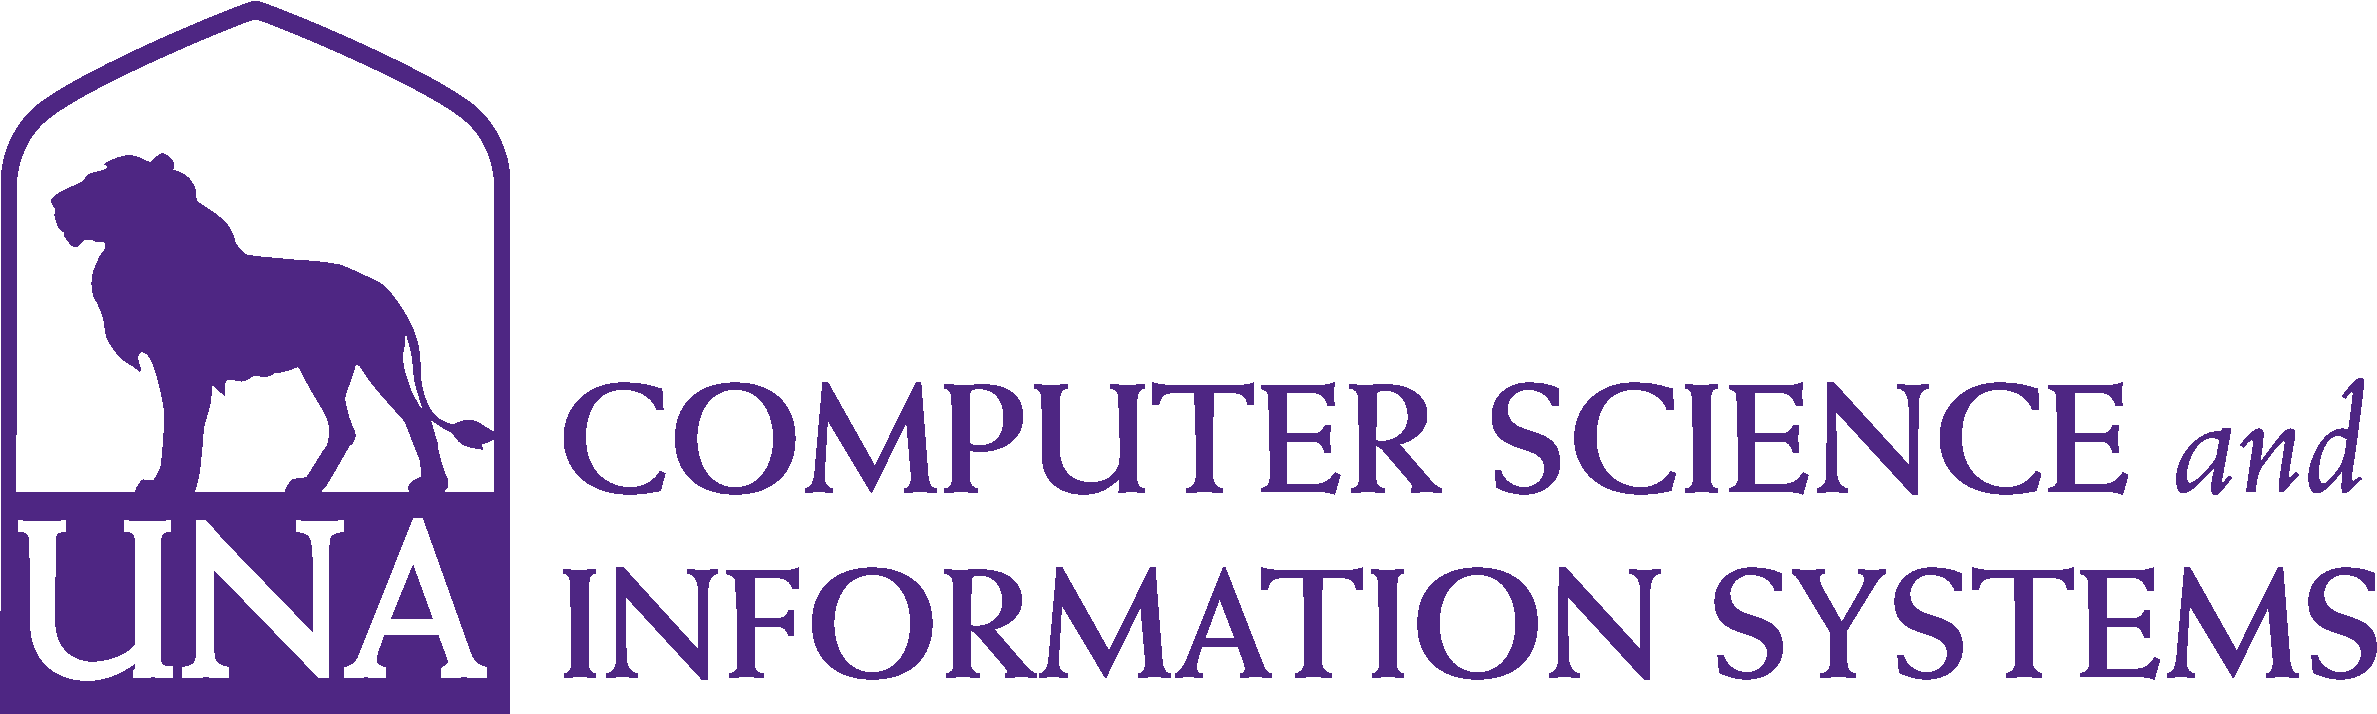 college of business computer science logo 3